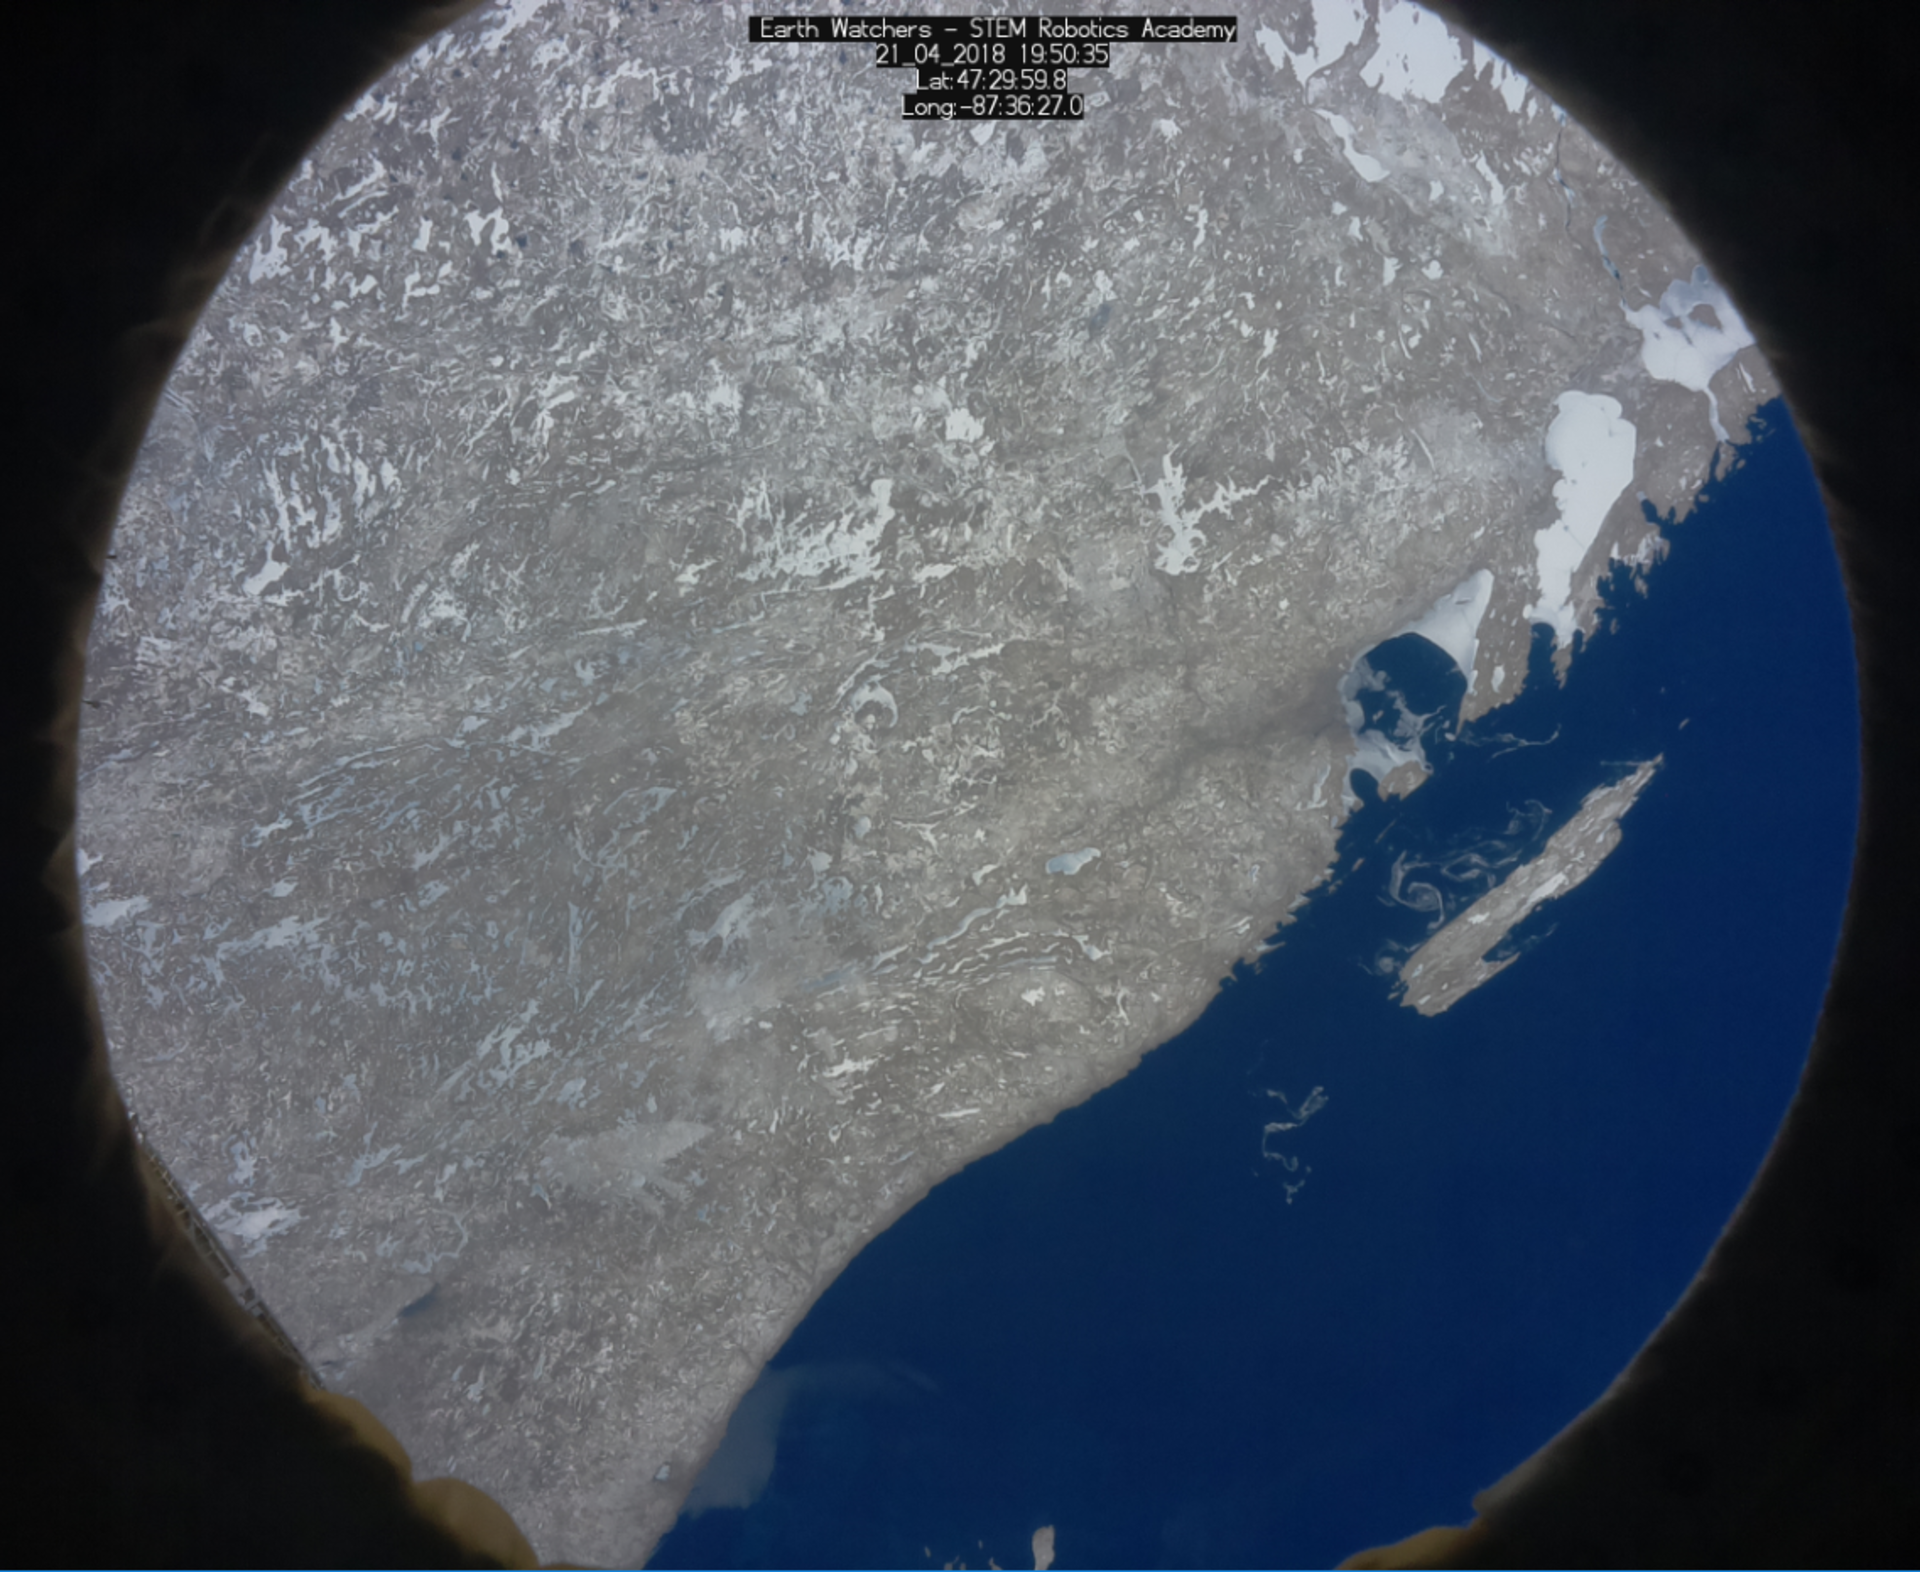 The Earth Watchers team captured this image that shows a frozen lake in Canada!